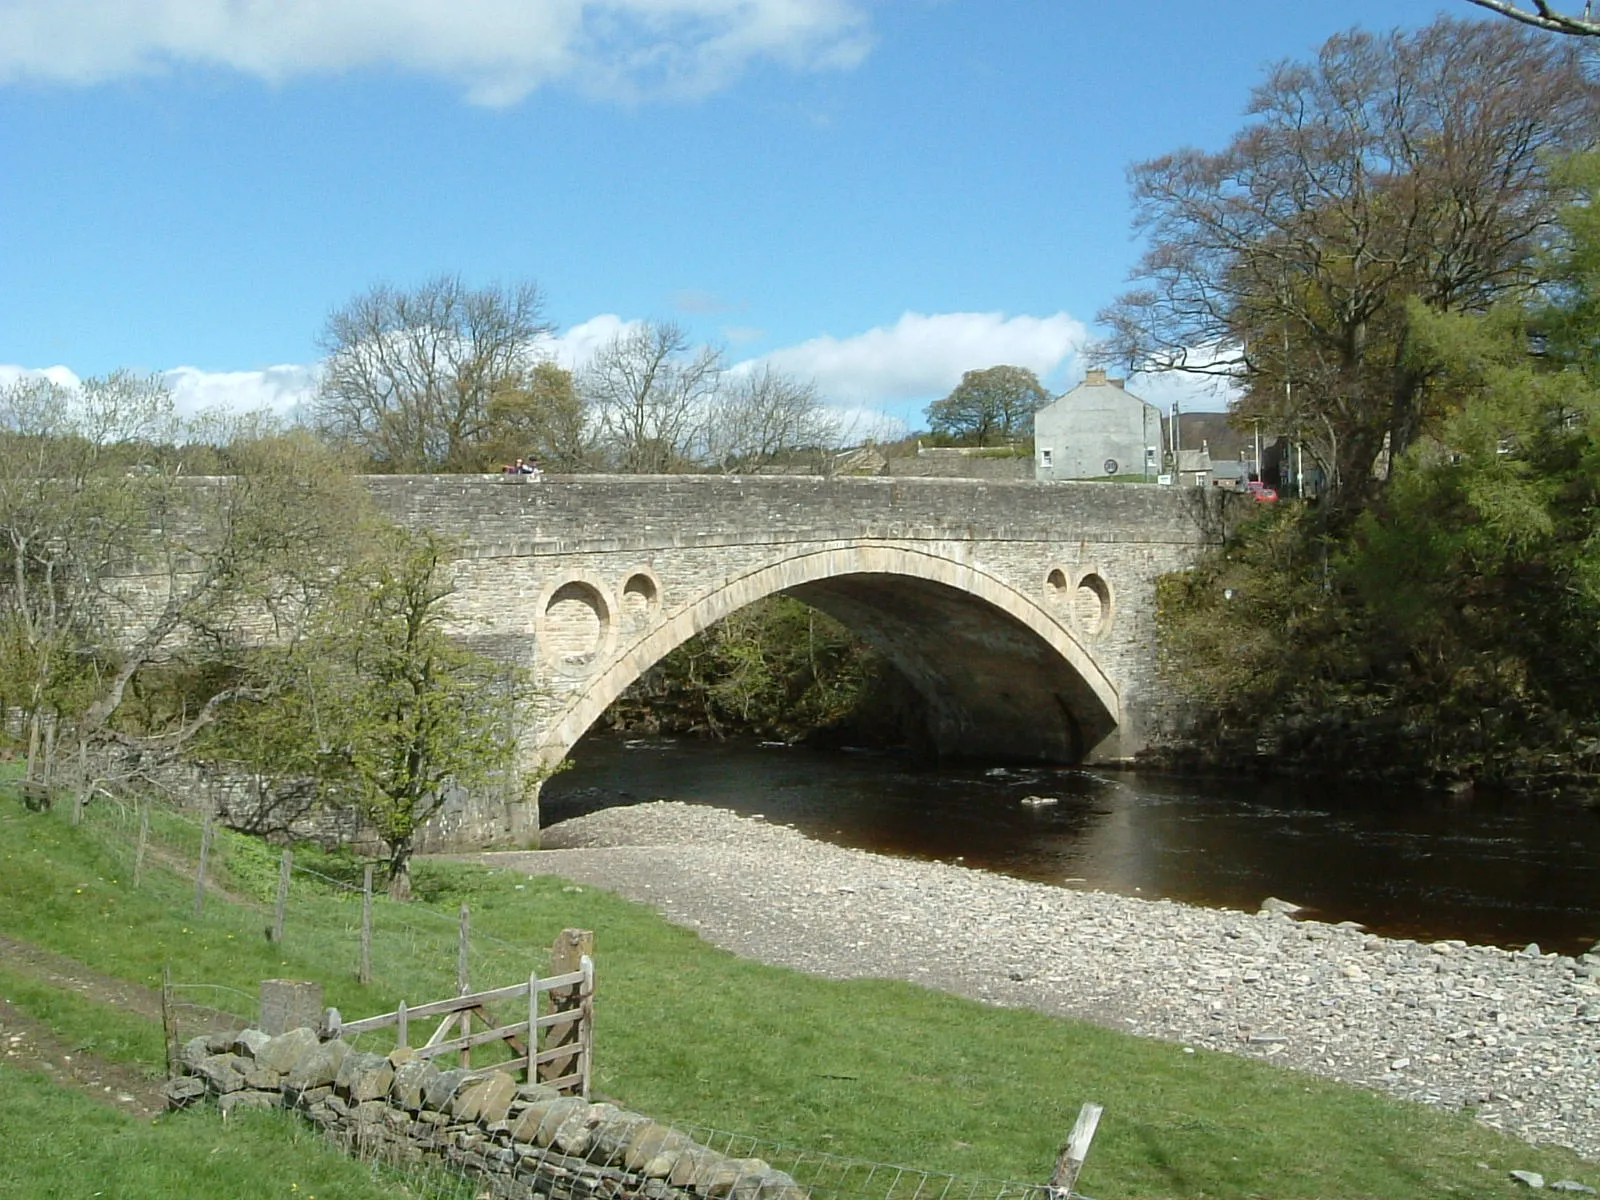 Photo showing: A bridge at Middleton-in-Teesdale.
Taken by James@hopgrove, April 2005.